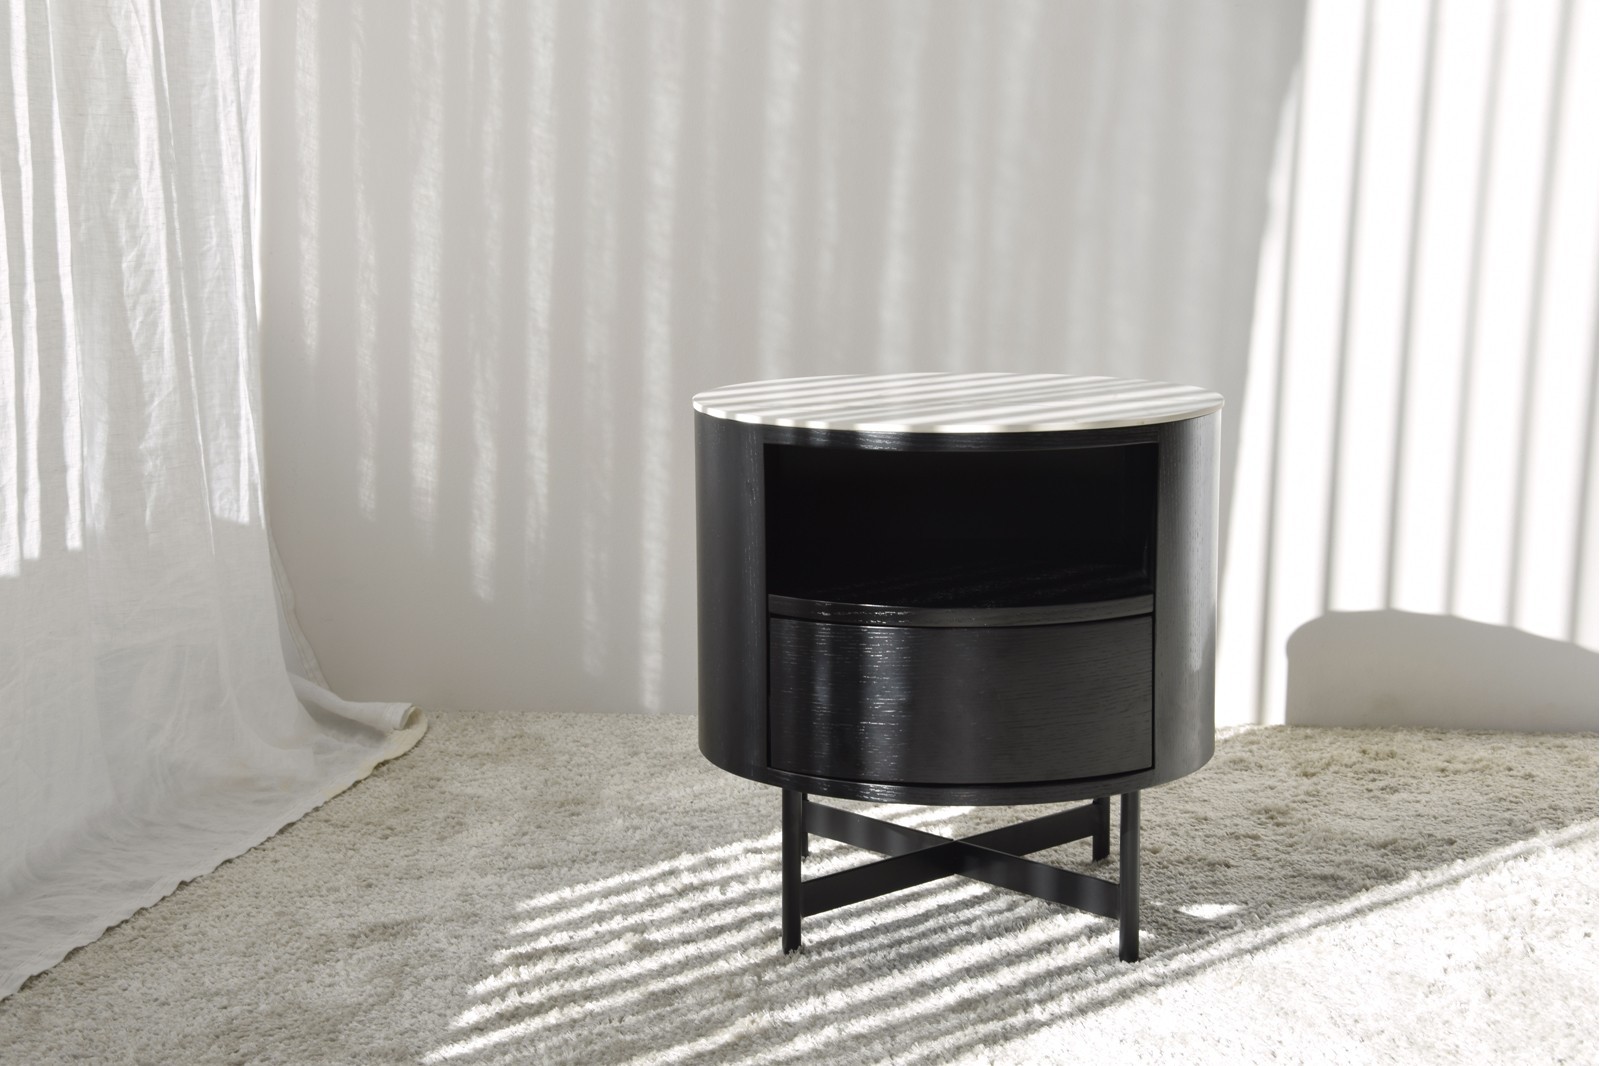 SIDE TABLE N.55. BLACK AND WHITE